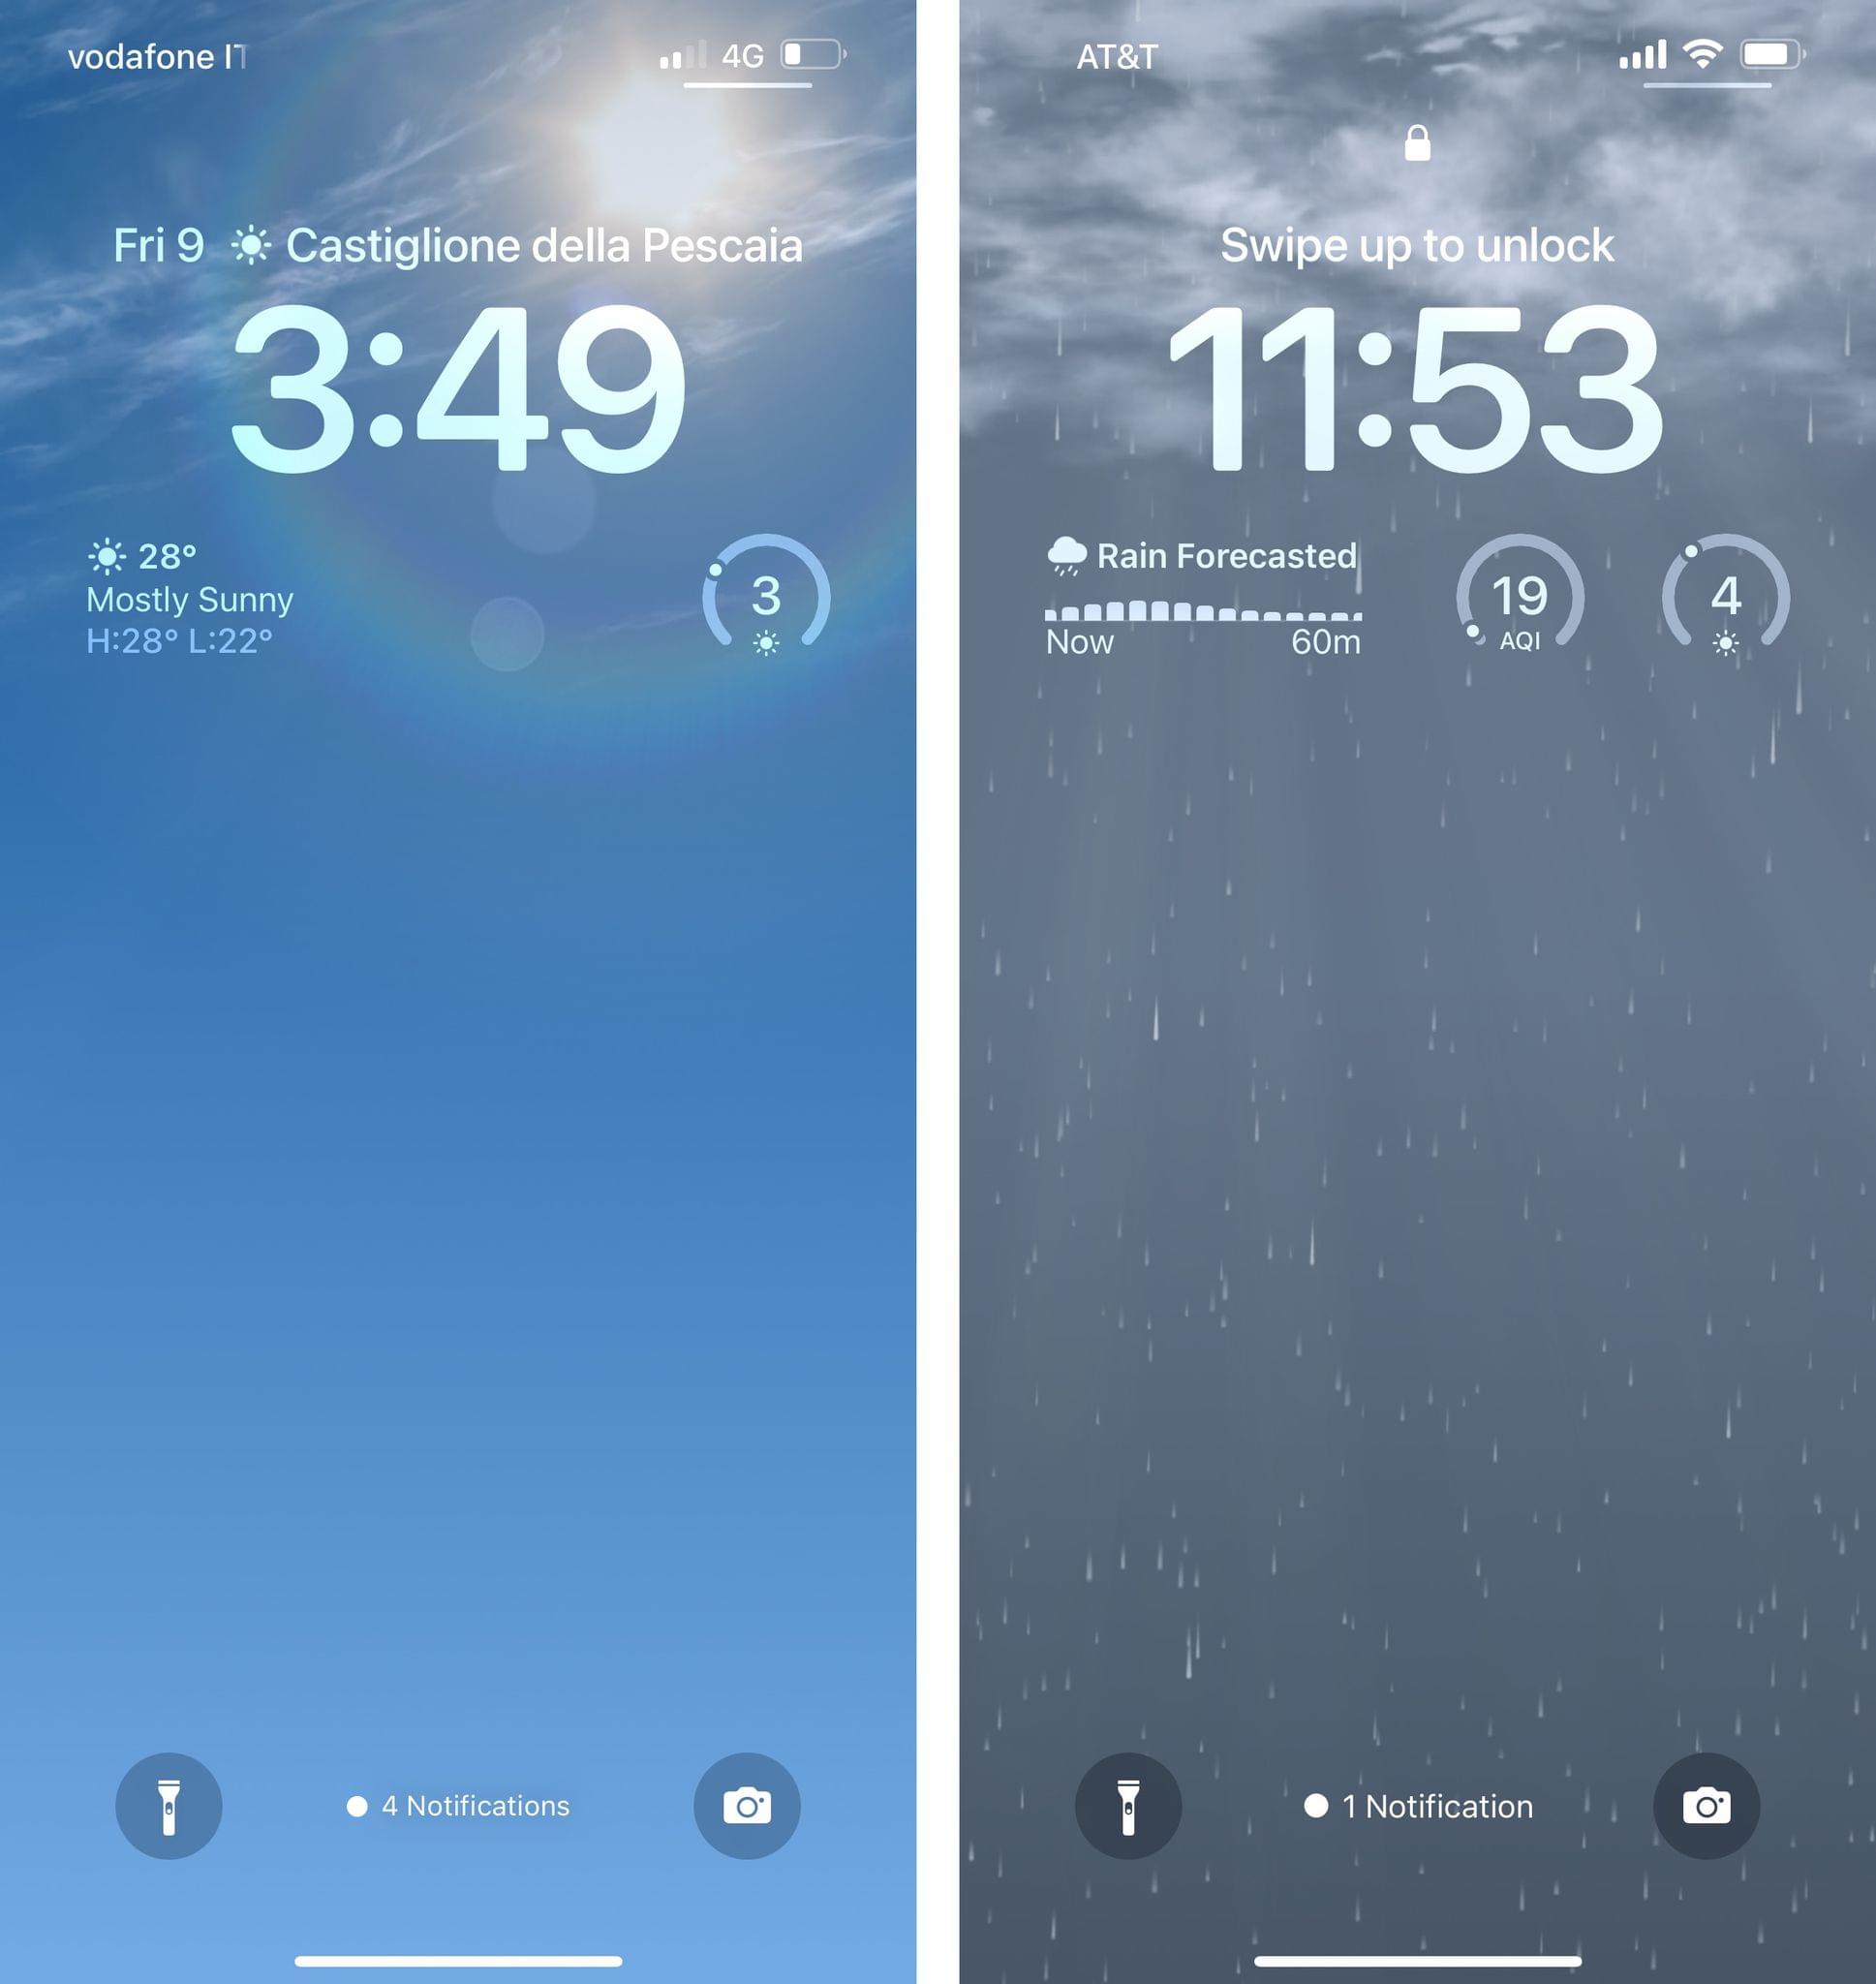 The Weather wallpaper with an associated Home Screen.